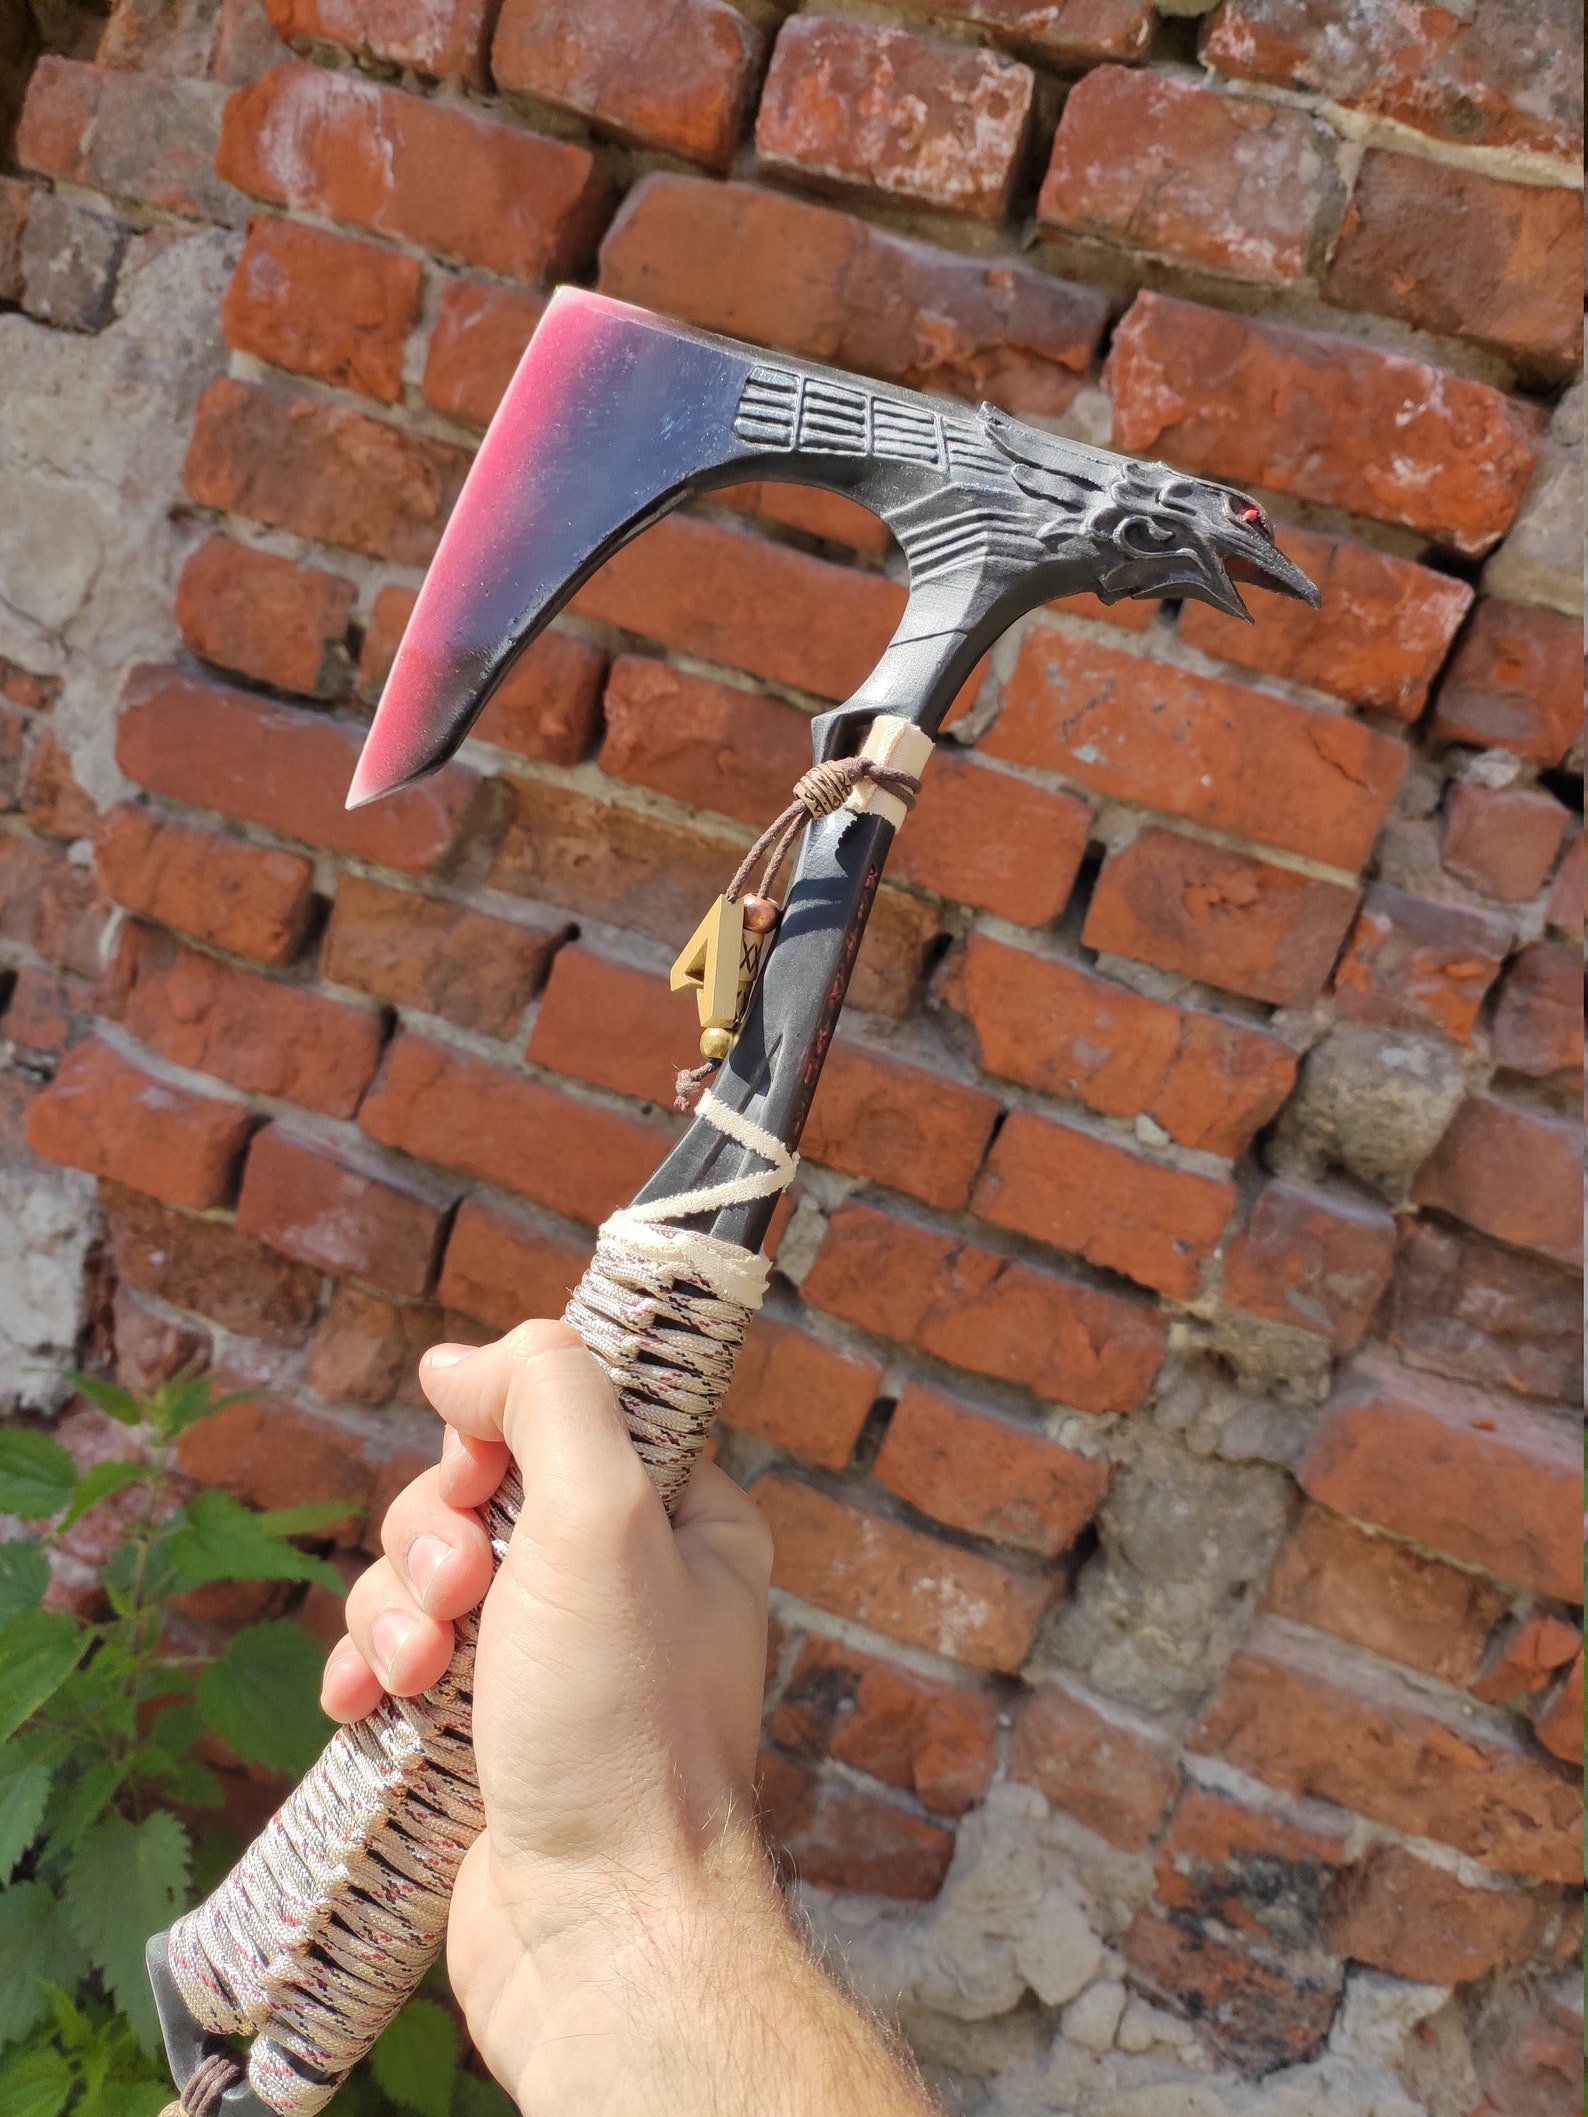 Apex Legends Bloodhound Heirloom Axe Full size replica image 0.